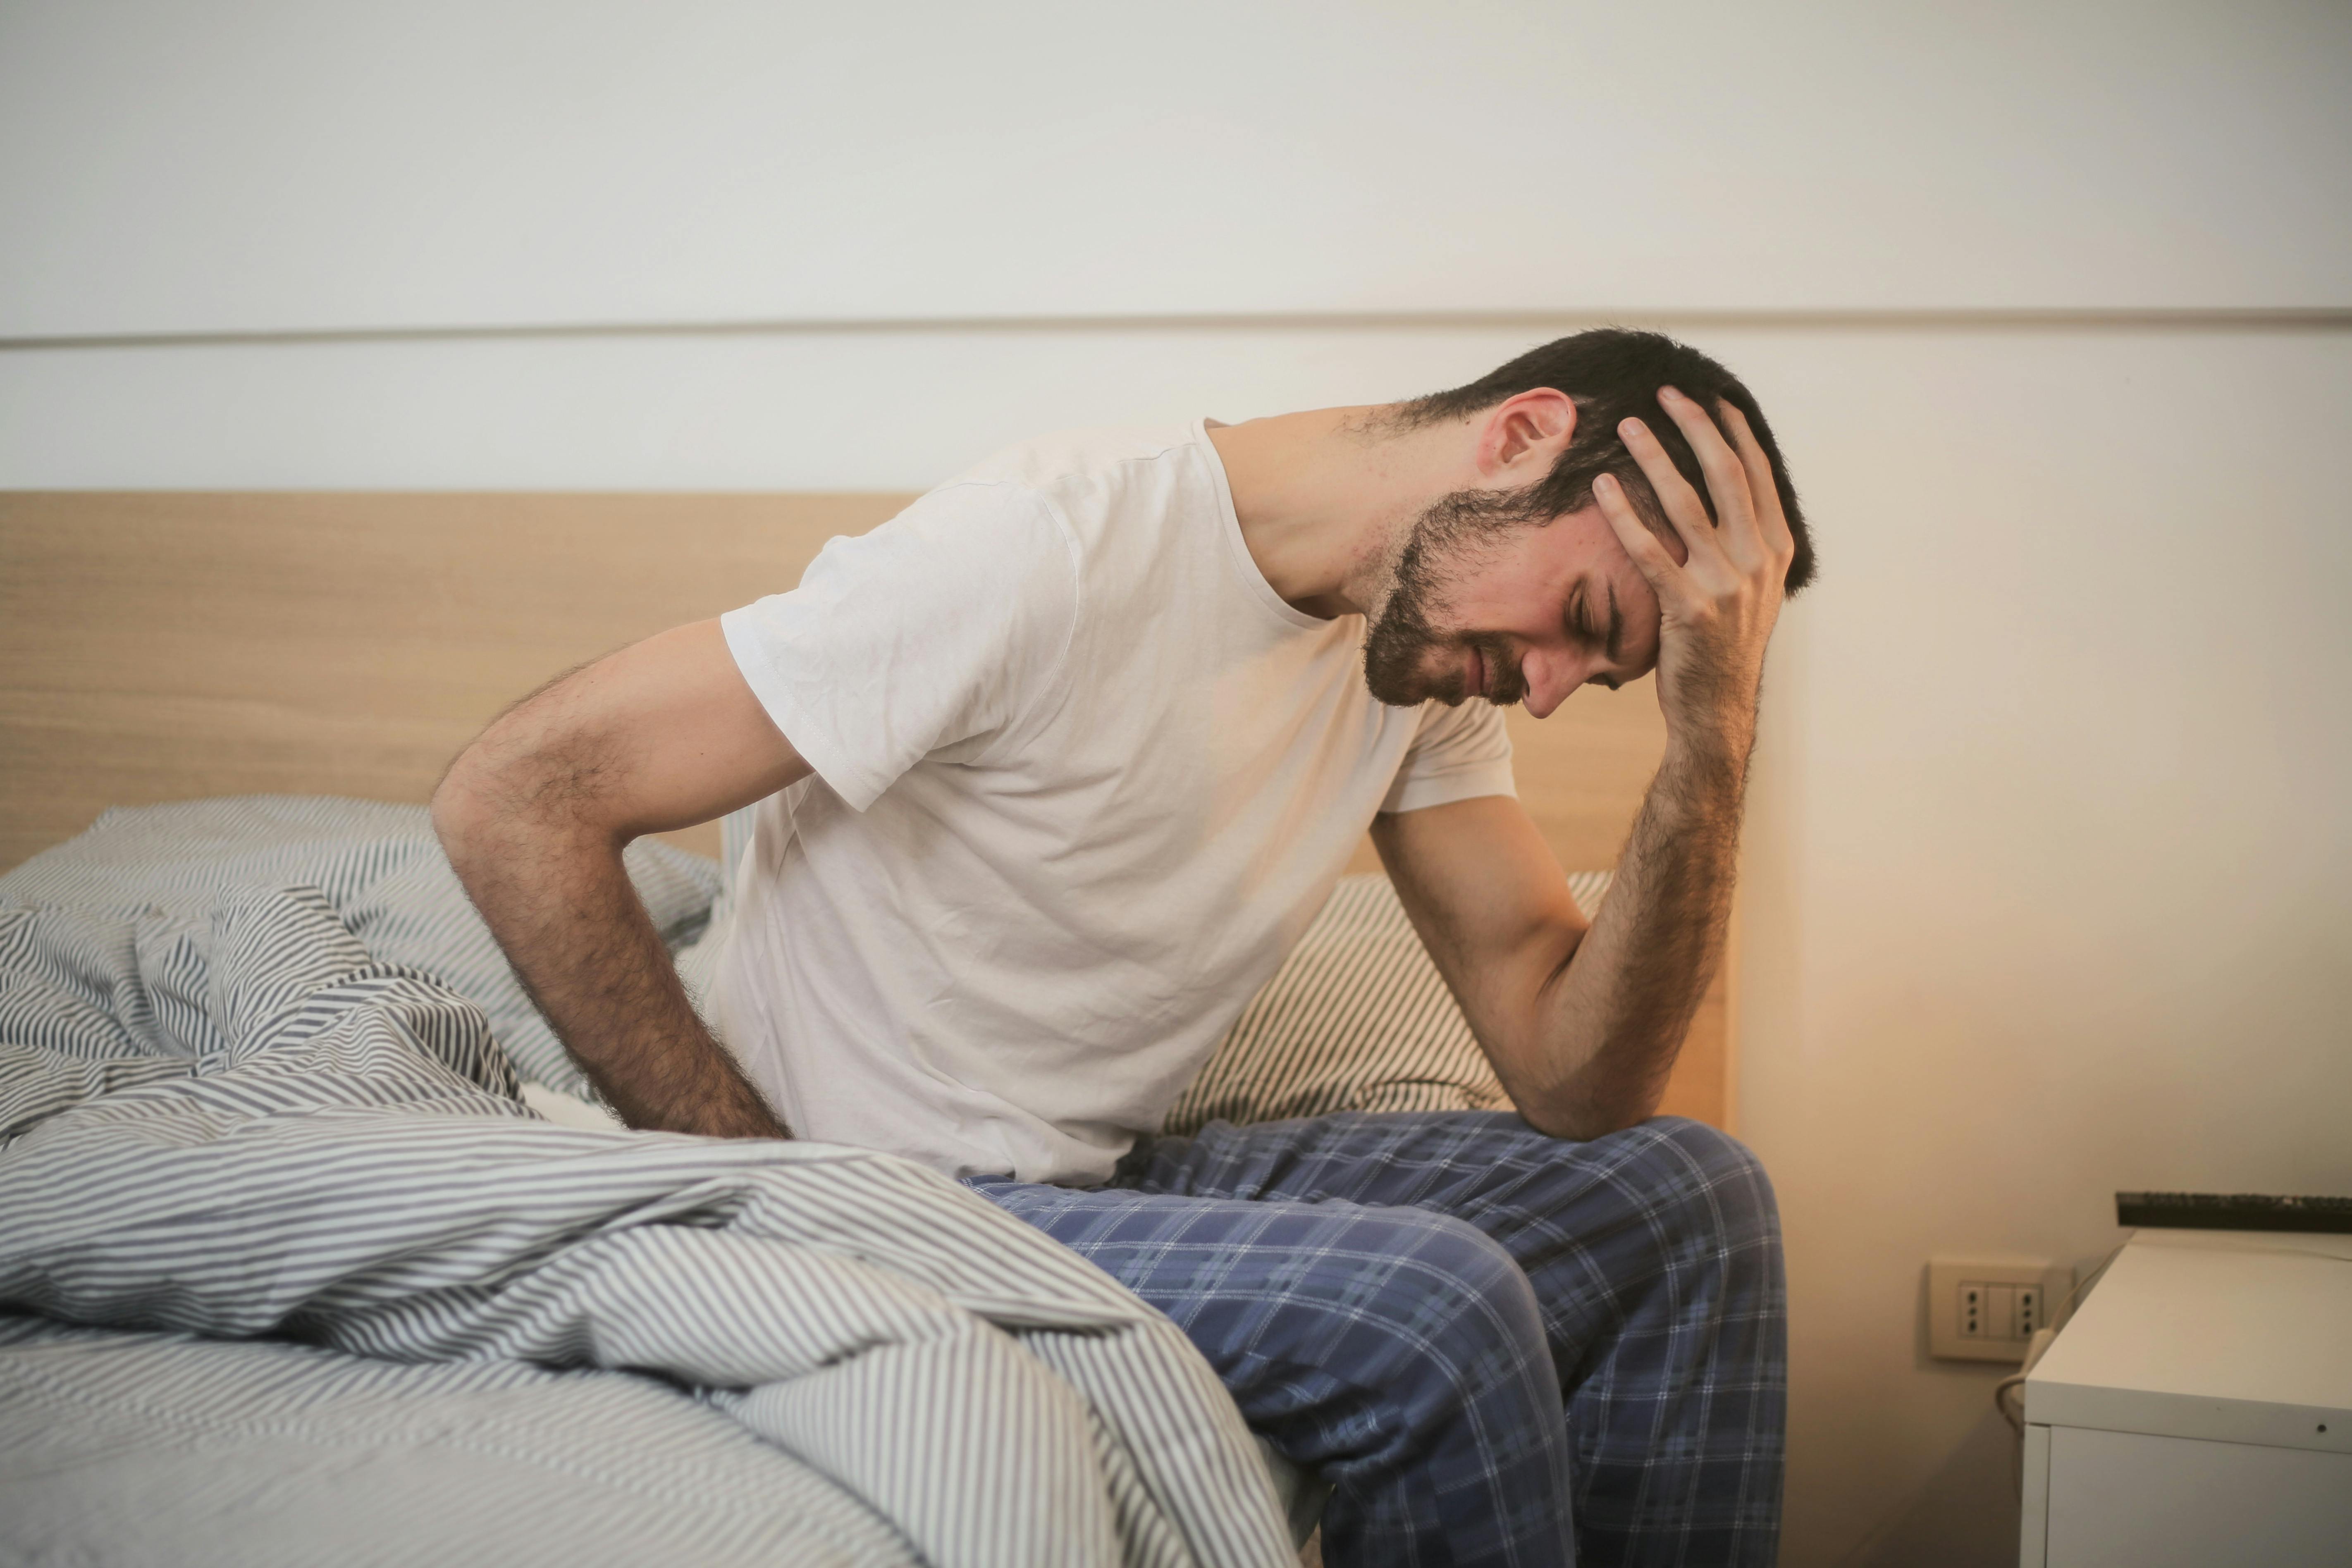 A stressed-out man sitting on a bed | Source: Pexels